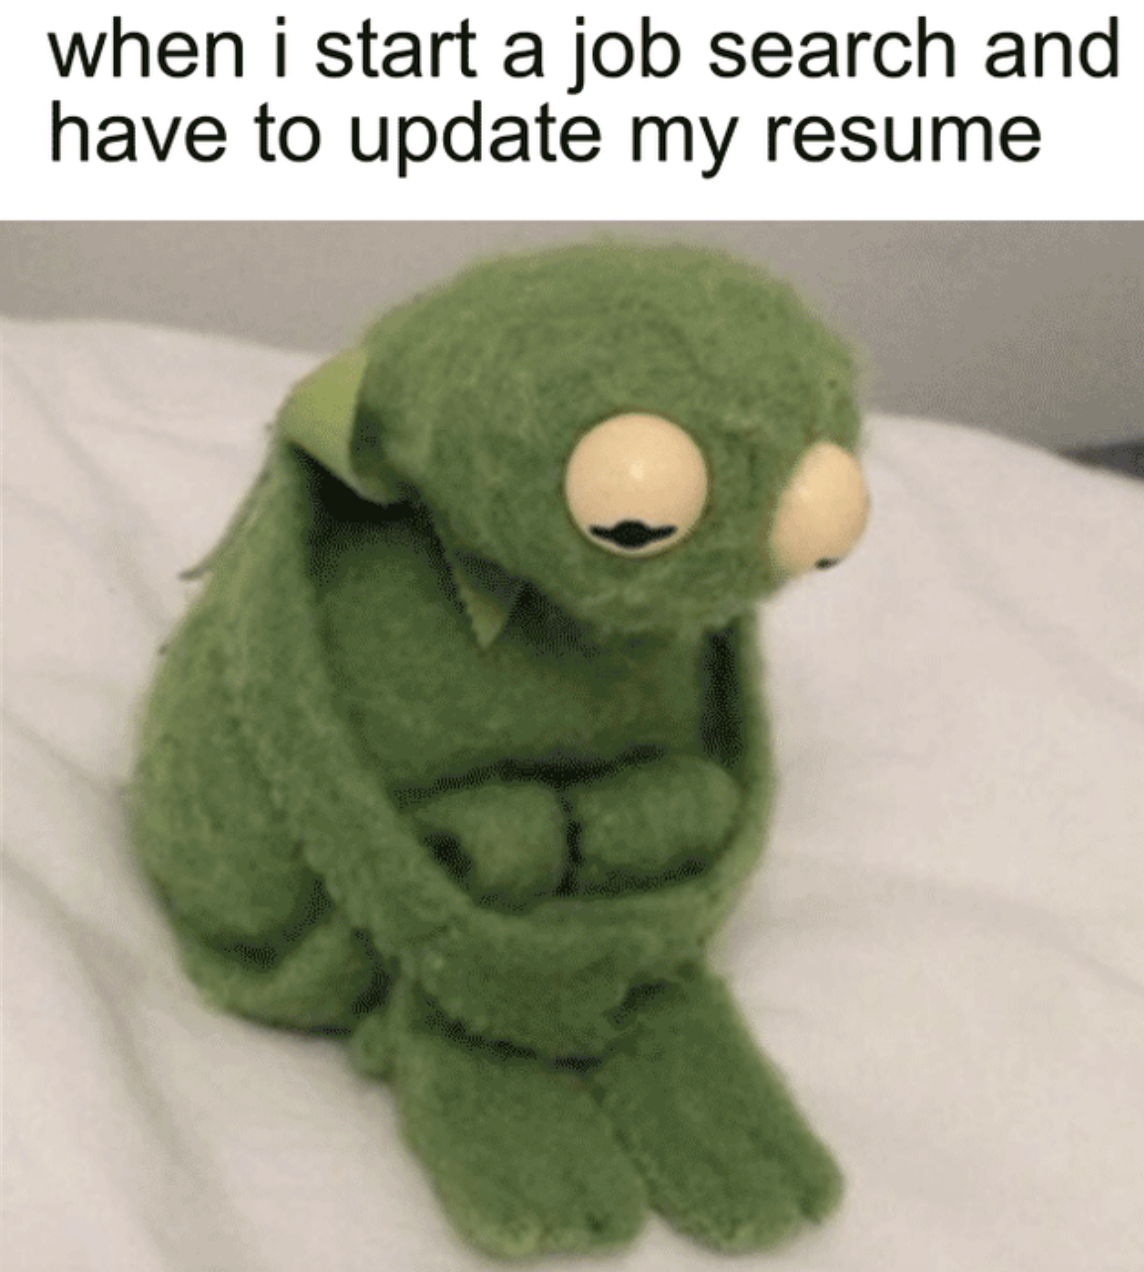 Work memes - plush - when i start a job search and have to update my resume